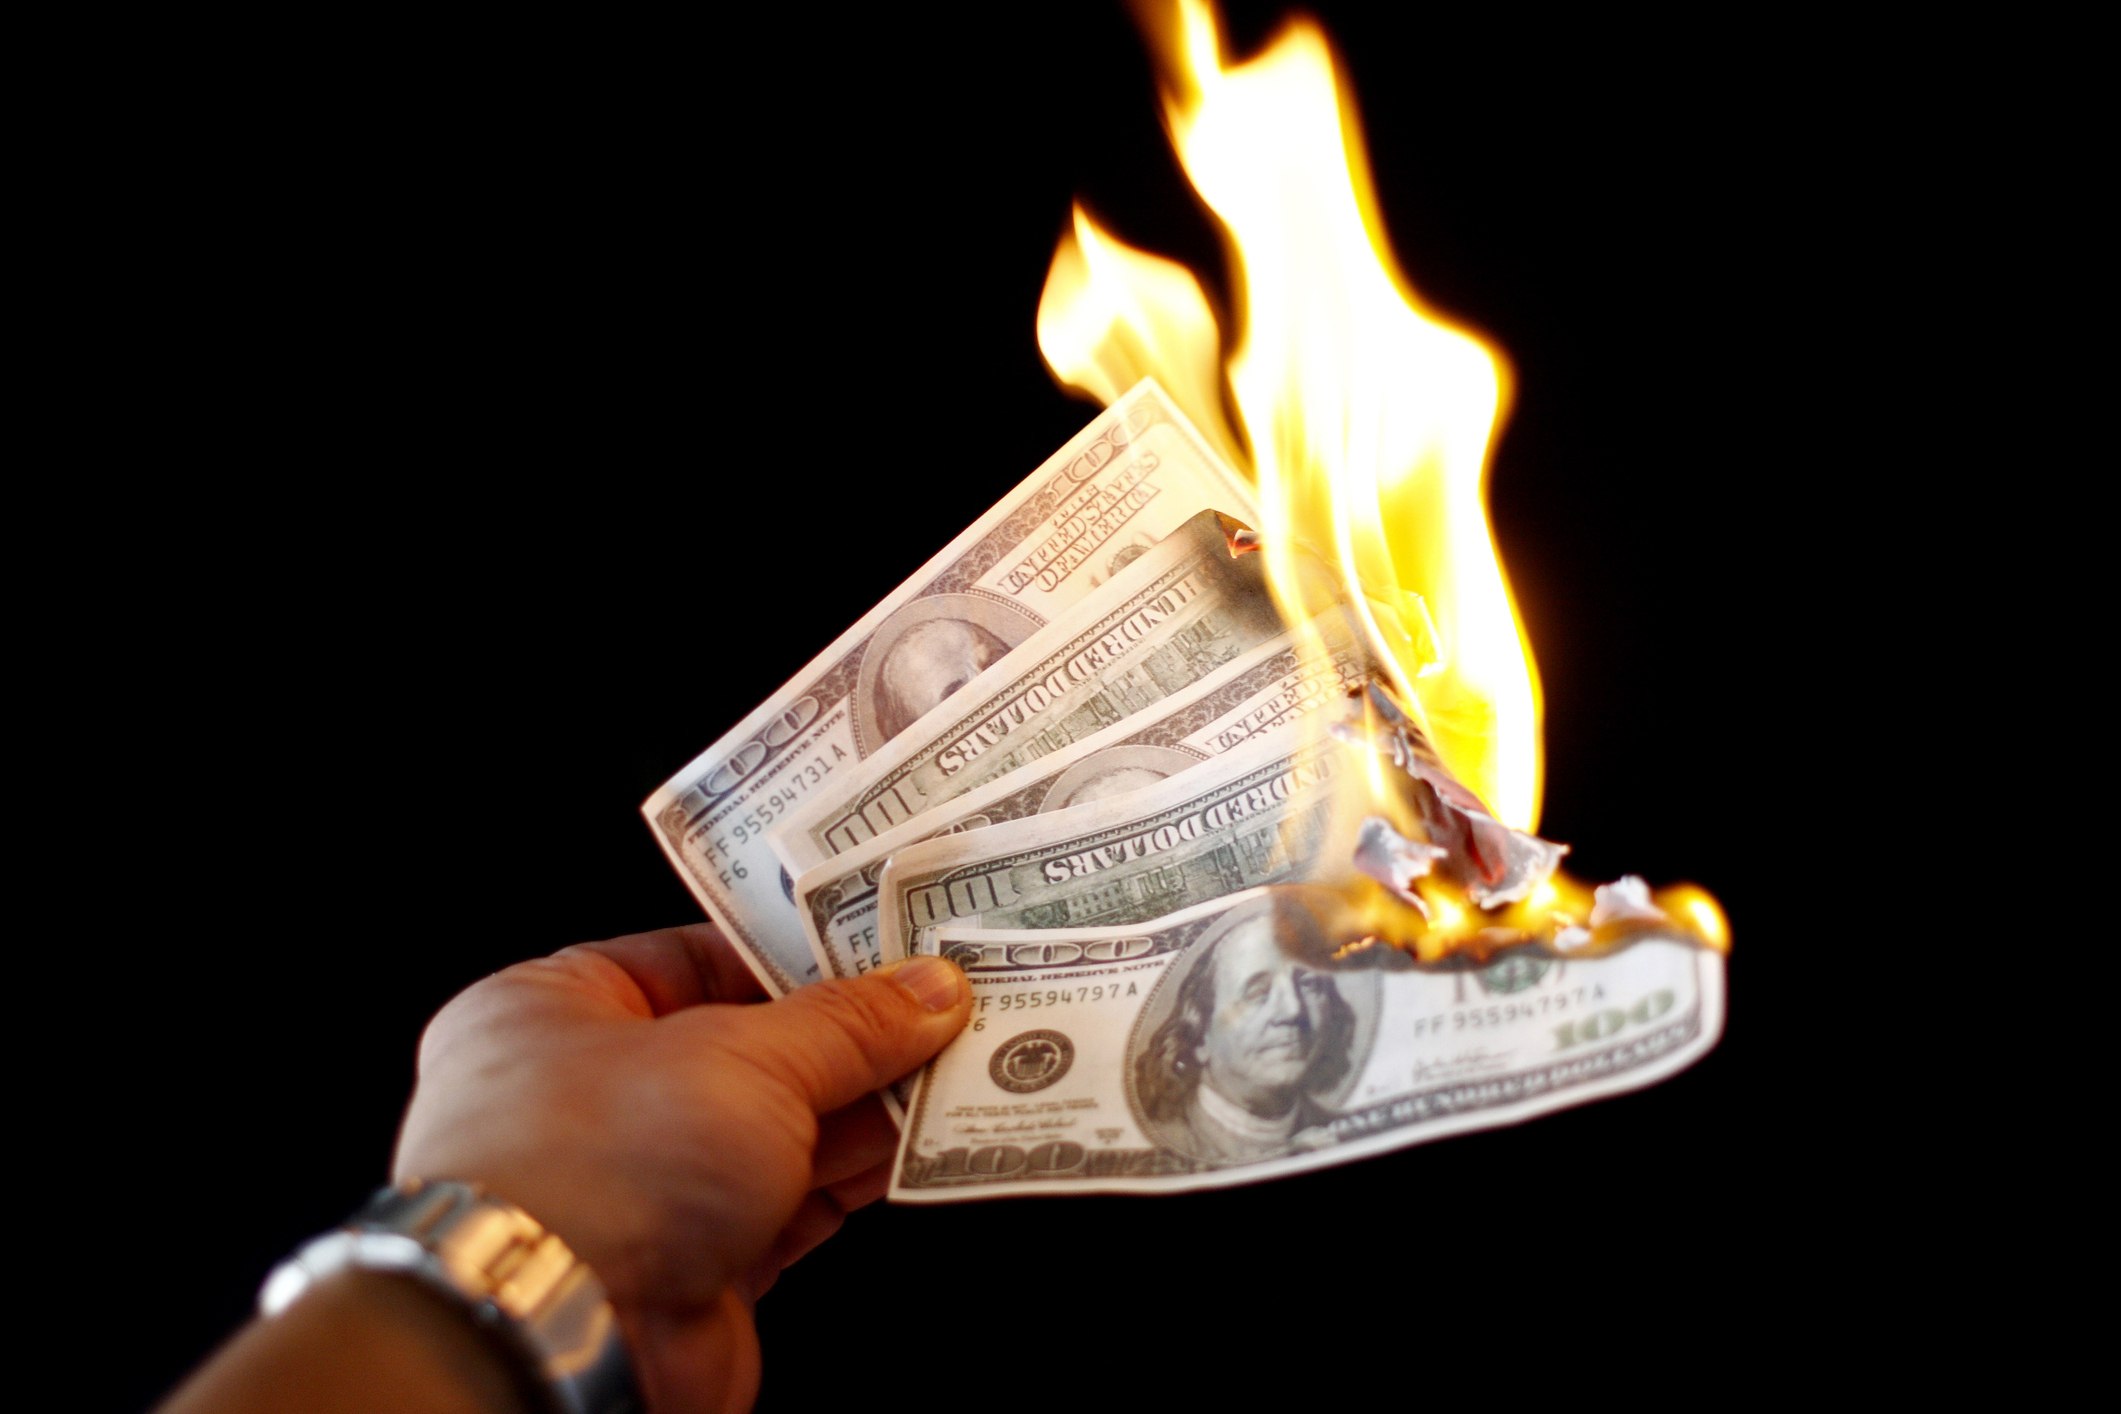 Hand holding cash on fire, symbolizing financial waste or loss, possibly related to parenting expenses